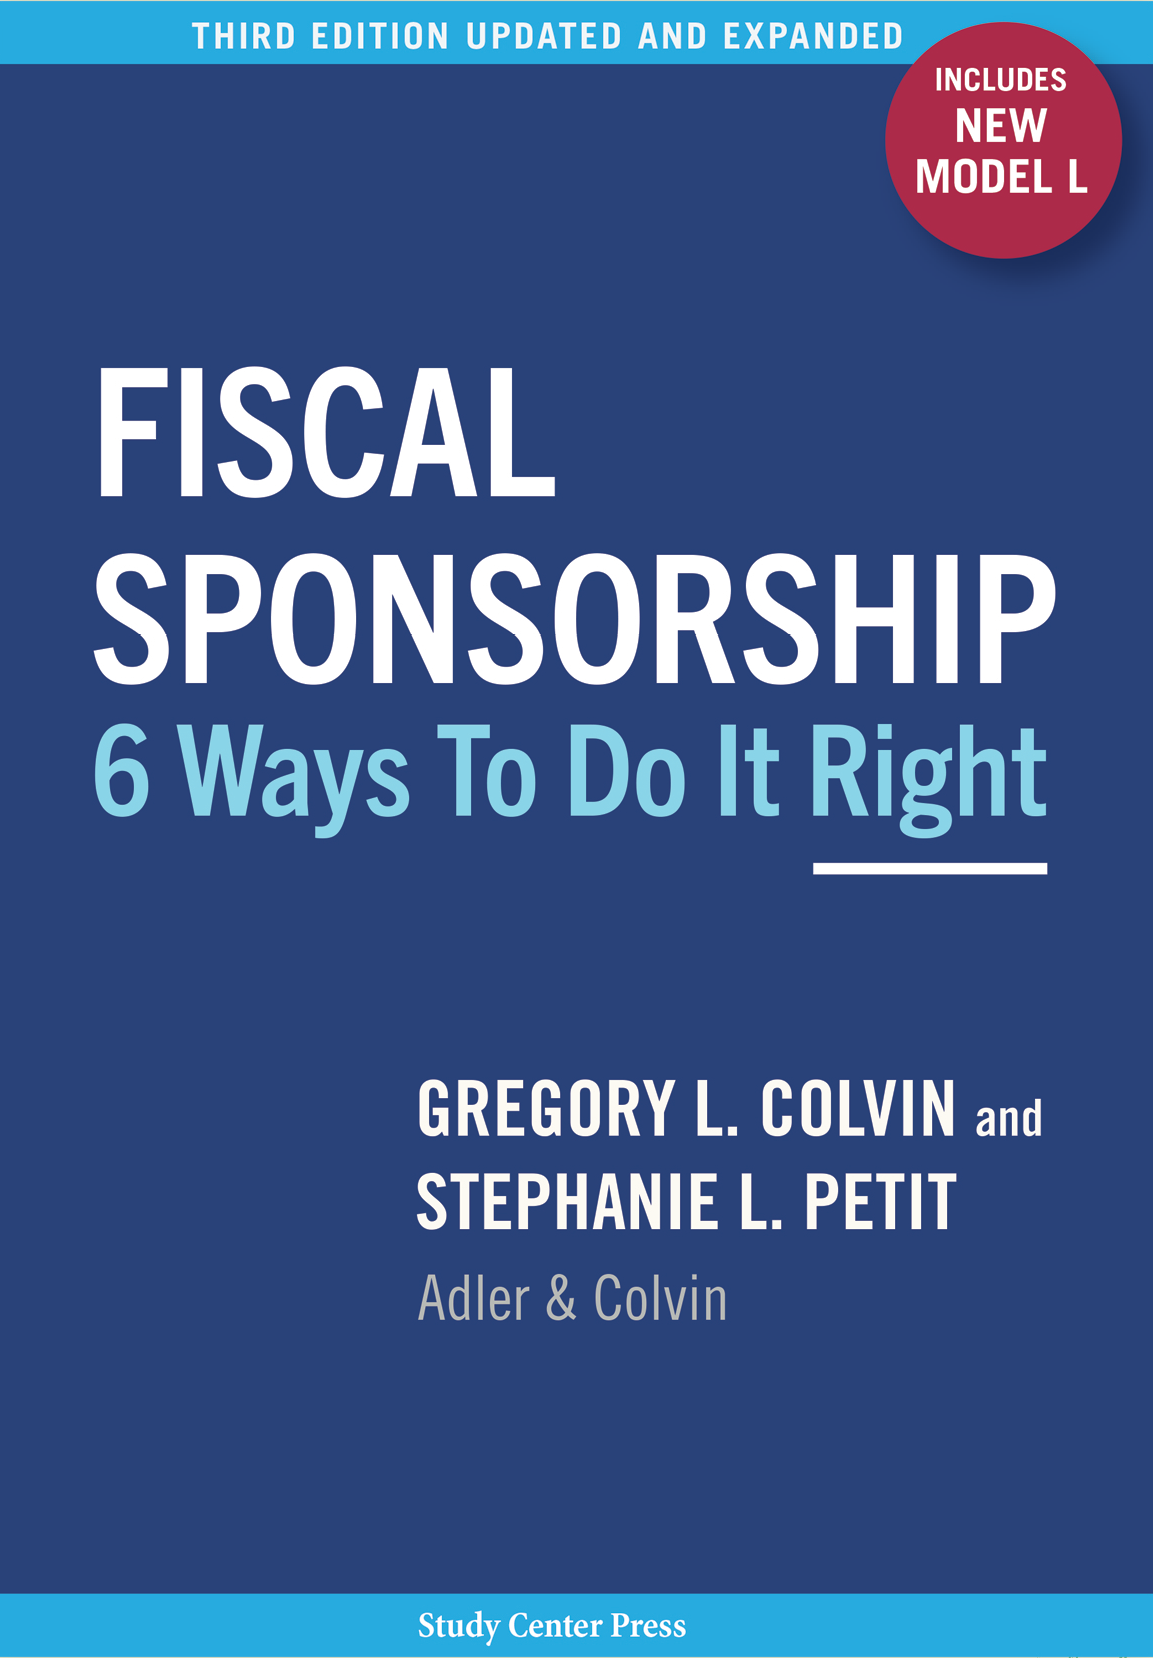 Fiscal Sponsorship 6 Ways Cover Third Edition